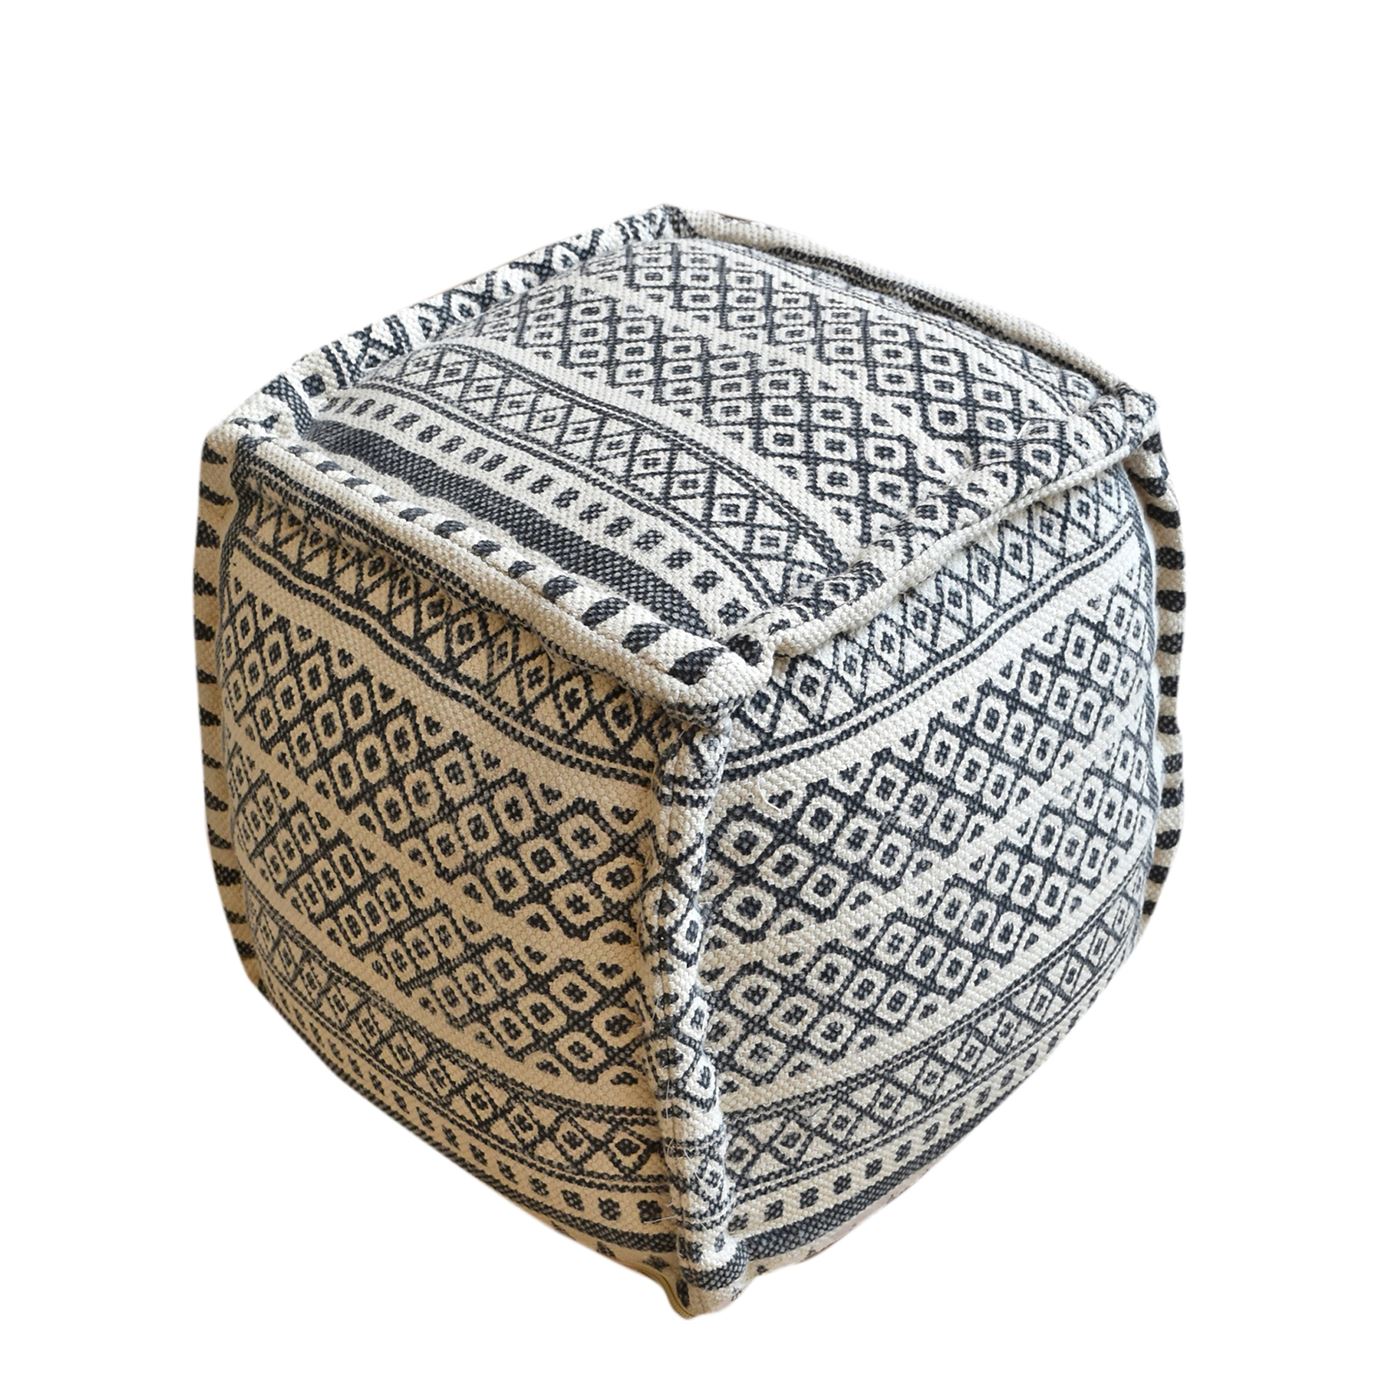 Tribo Pouf, Cotton/ Printed, Charcoal/ Natural White, Pitloom, Flat Weave 